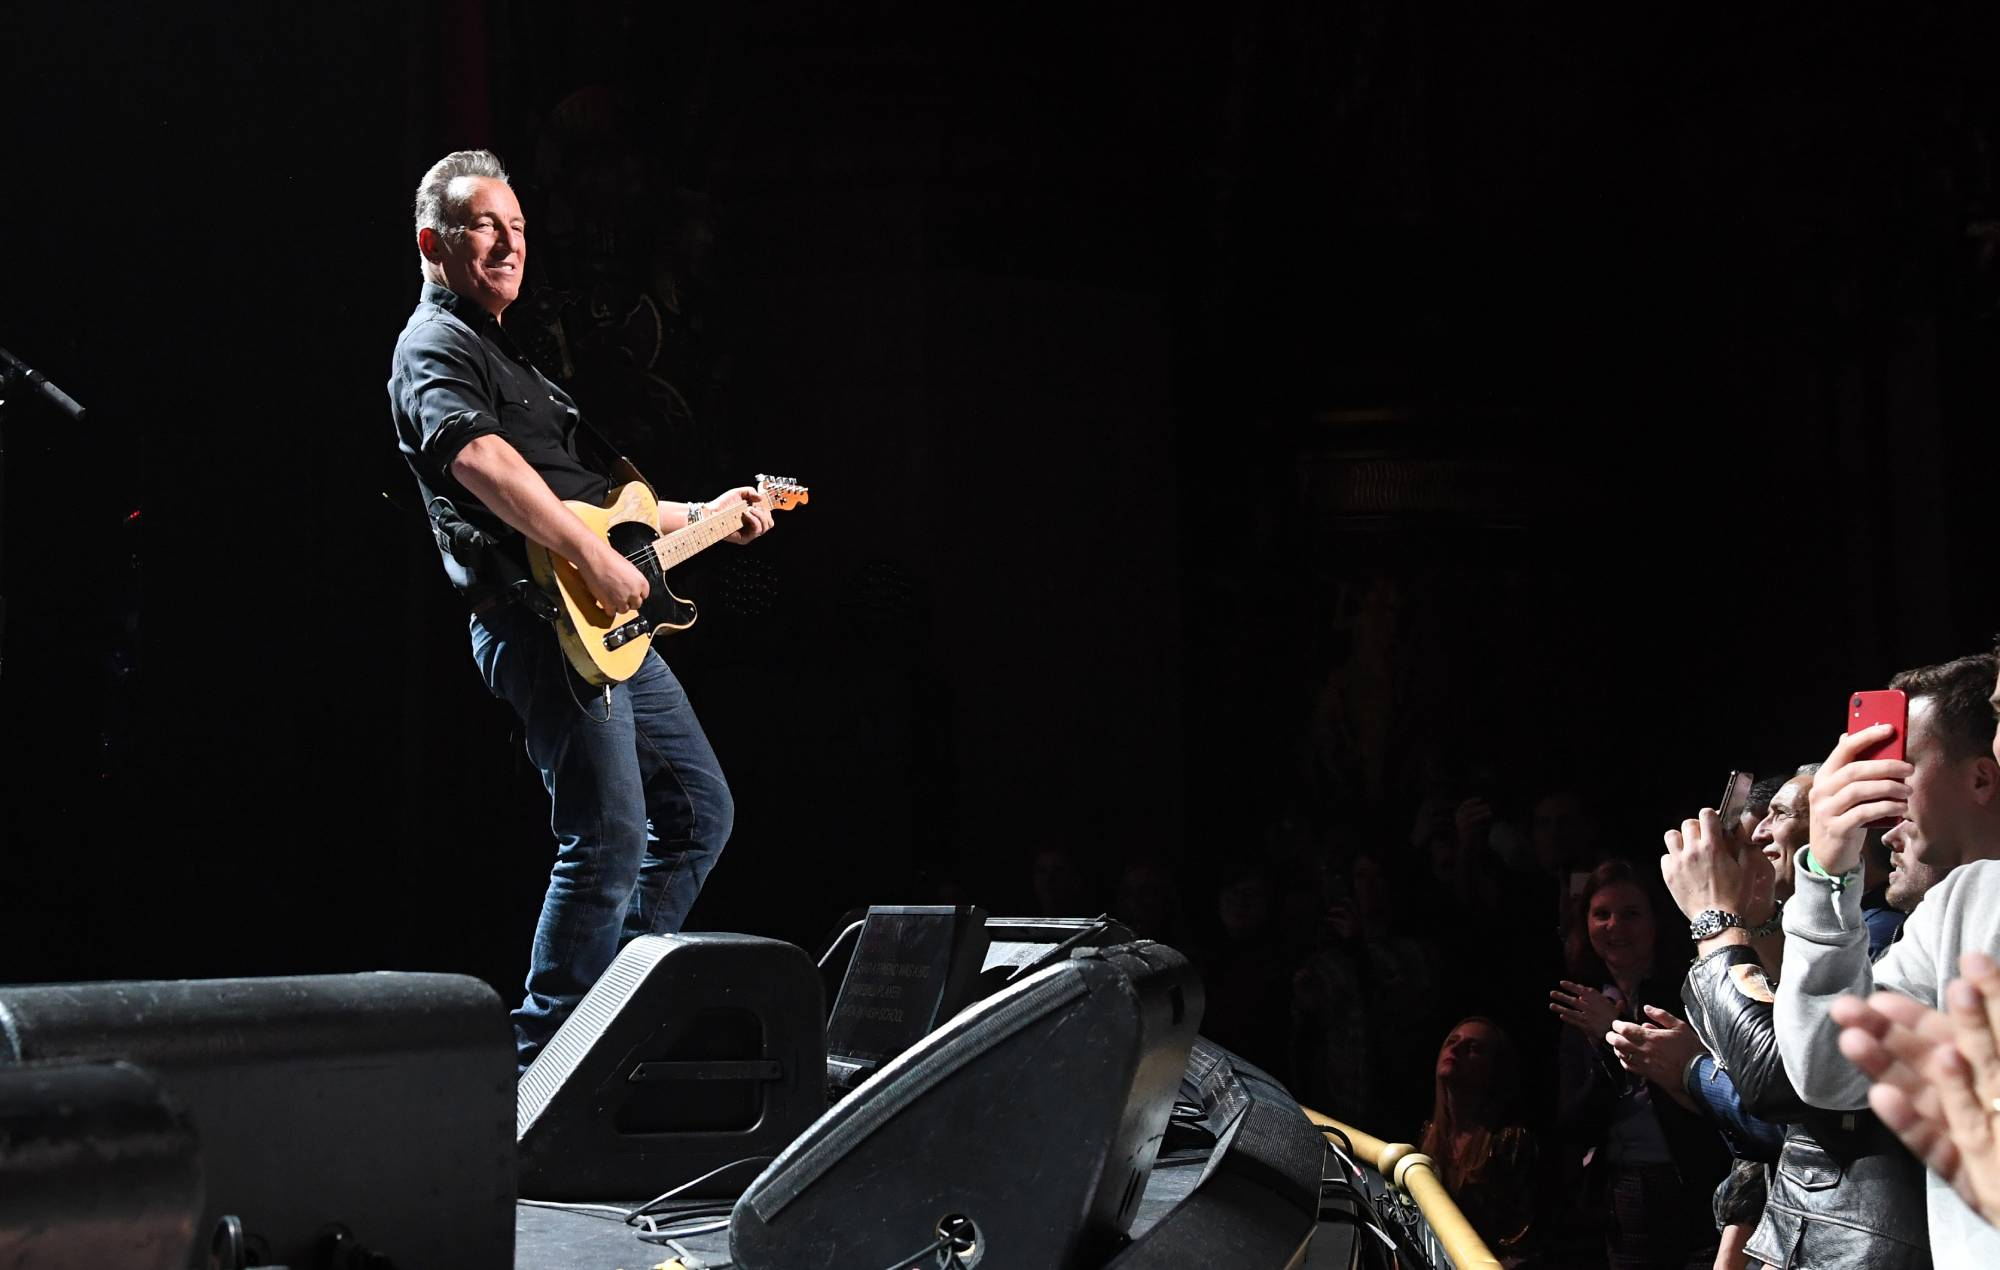 2000x1270 Bruce Springsteen says he hopes to resume touring next year